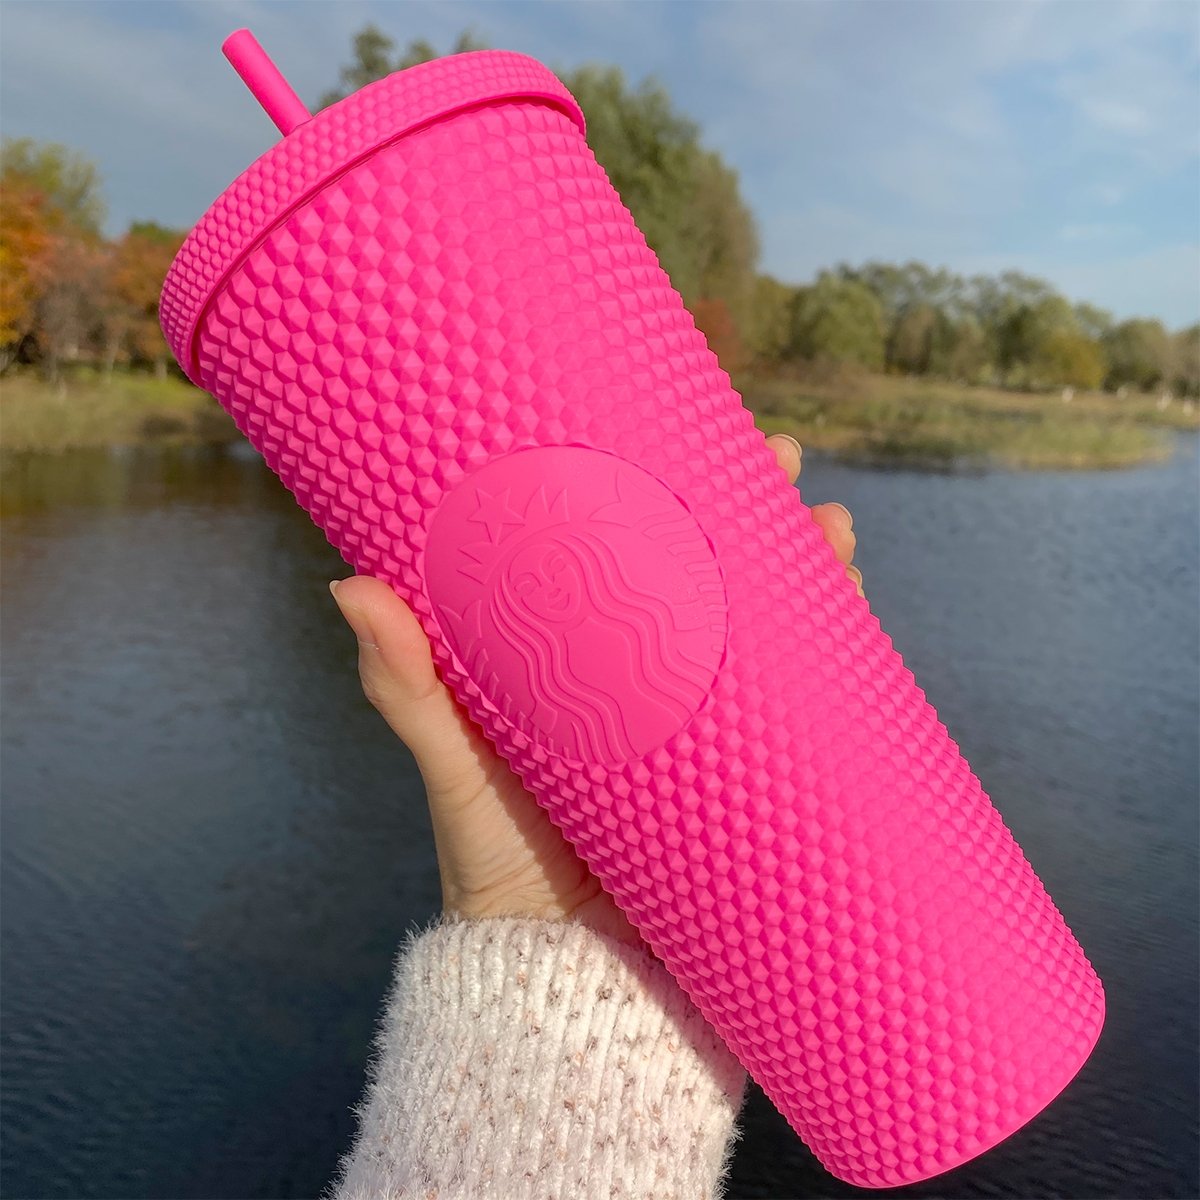 This Pink Tumbler is the Closest Thing to an Official Barbie Starbucks Cup  - Let's Eat Cake